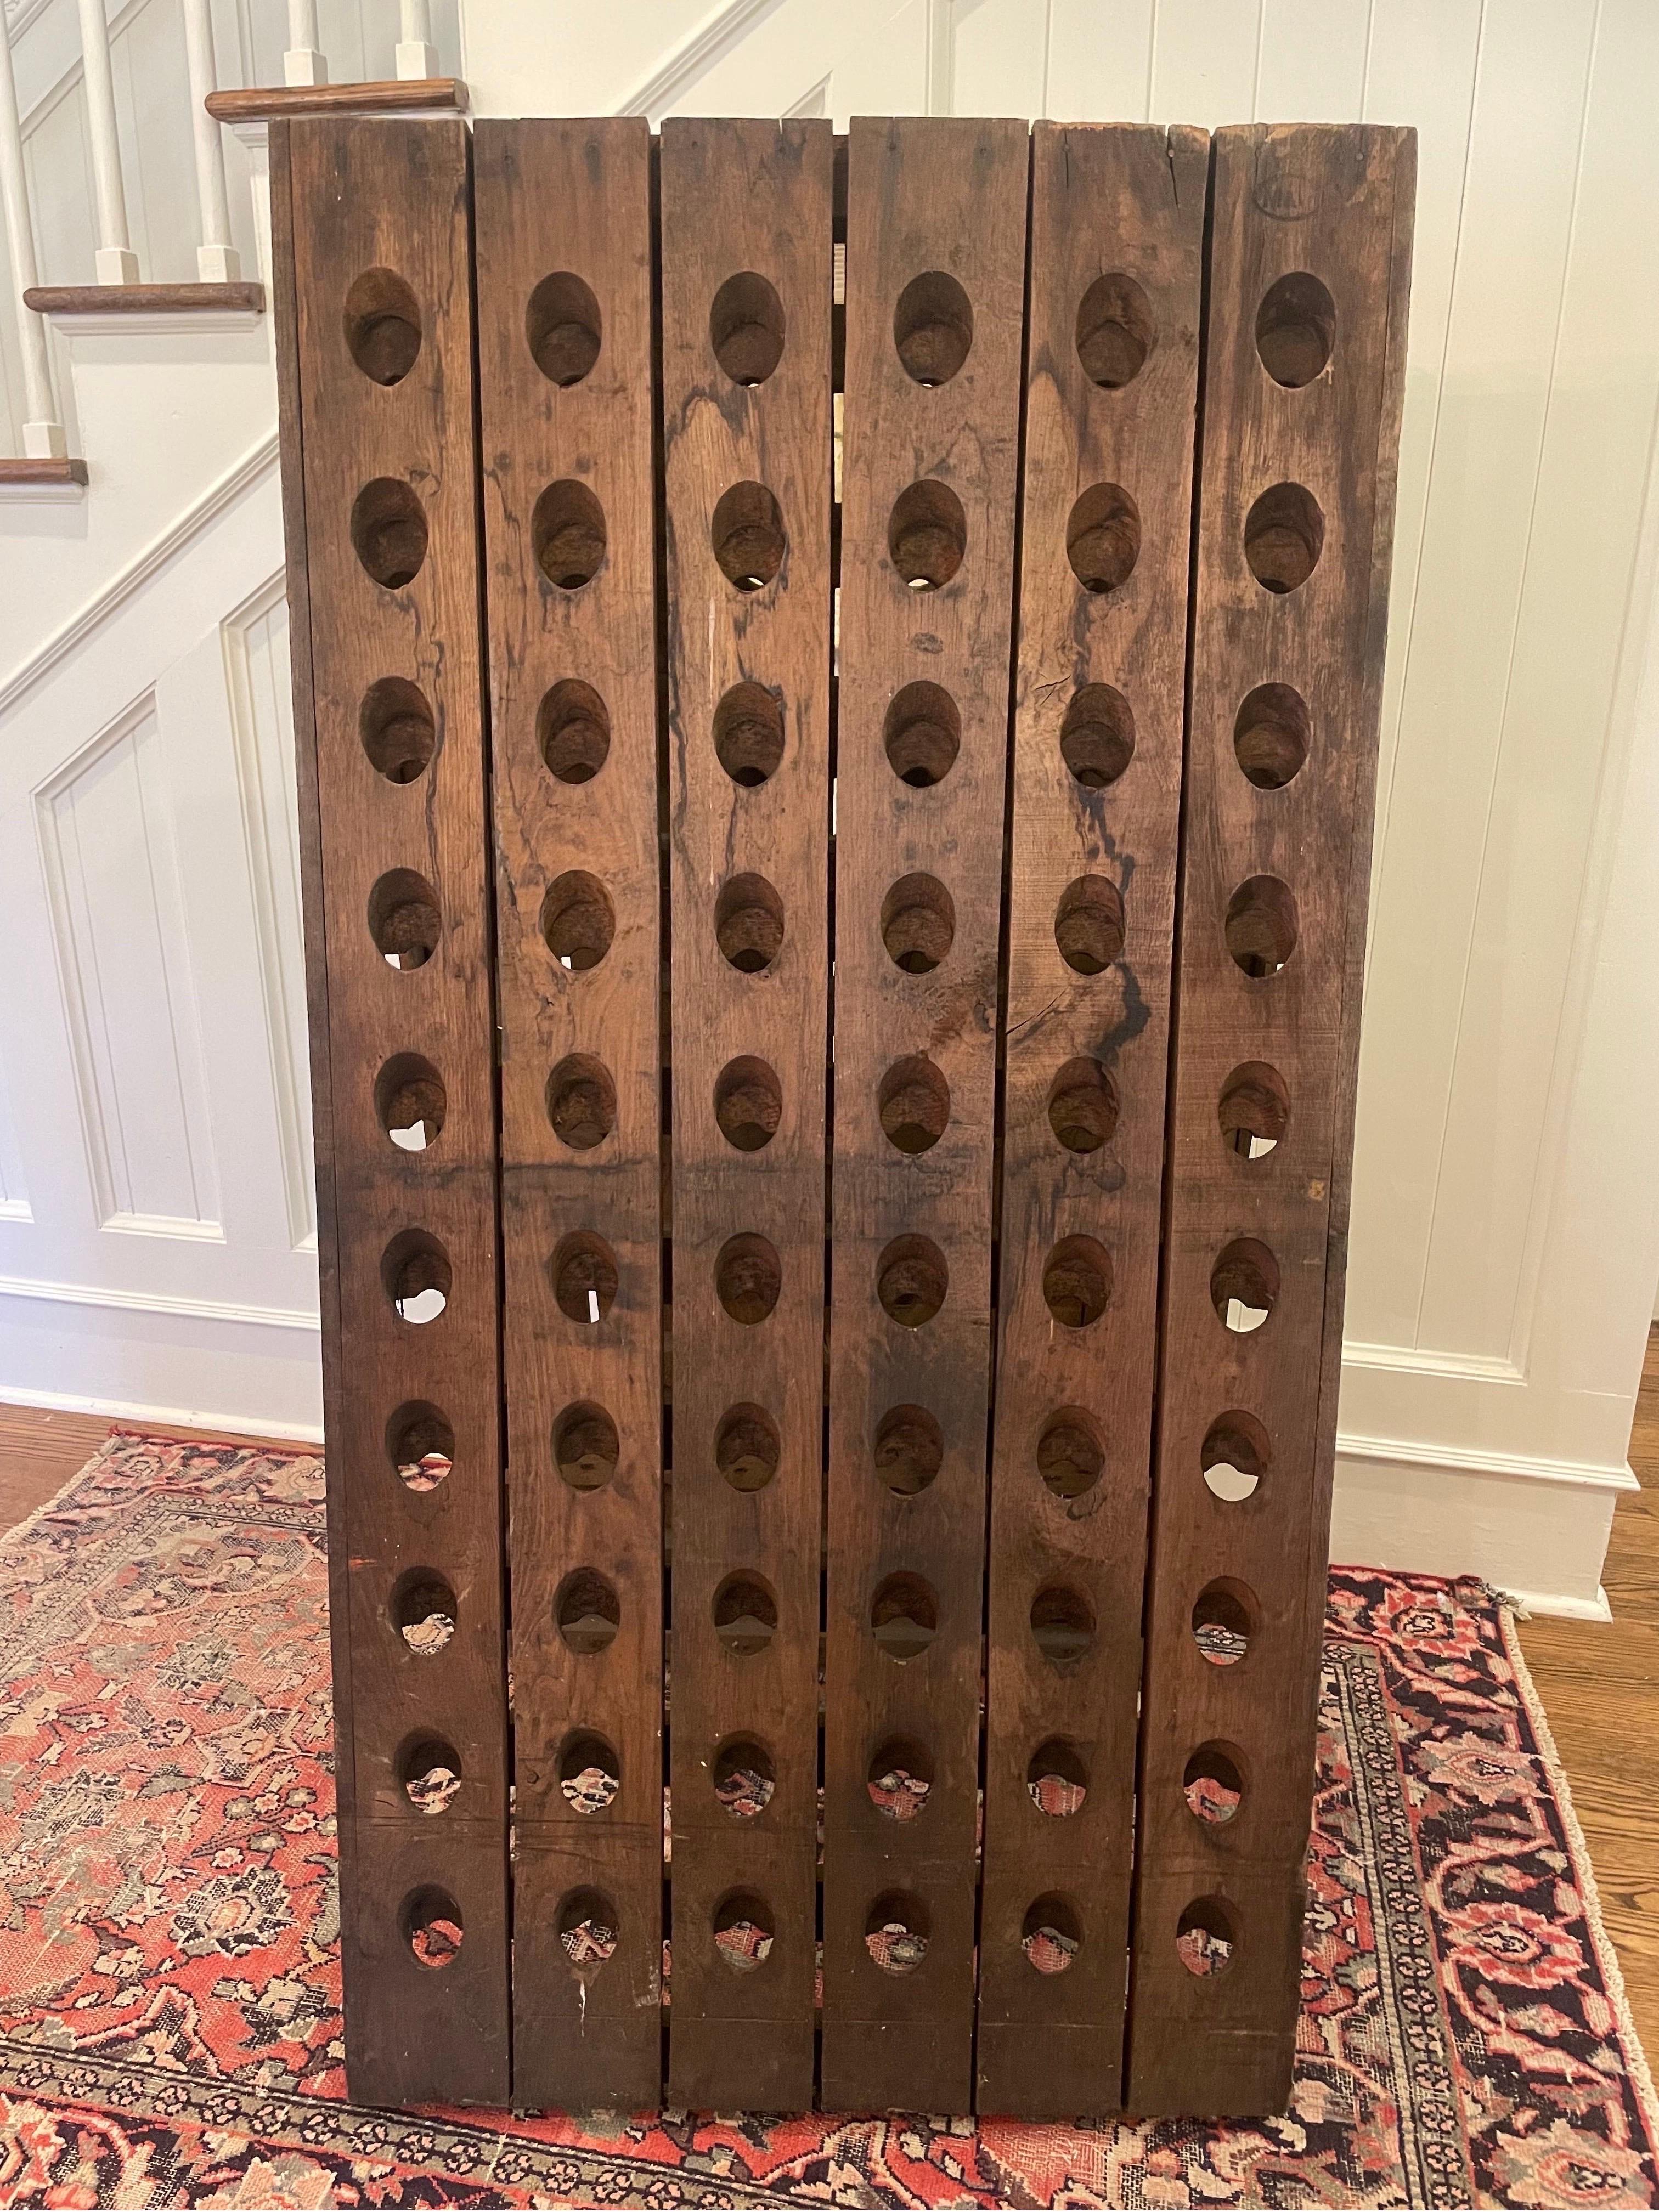 Antique standing riddling rack from France. These were designed to store wine bottles in. Each side of the rack as 60 holes. Our Vintage A frame French Riddling Rack is from the early 20th century. Use for storage of unopened bottles or keep the